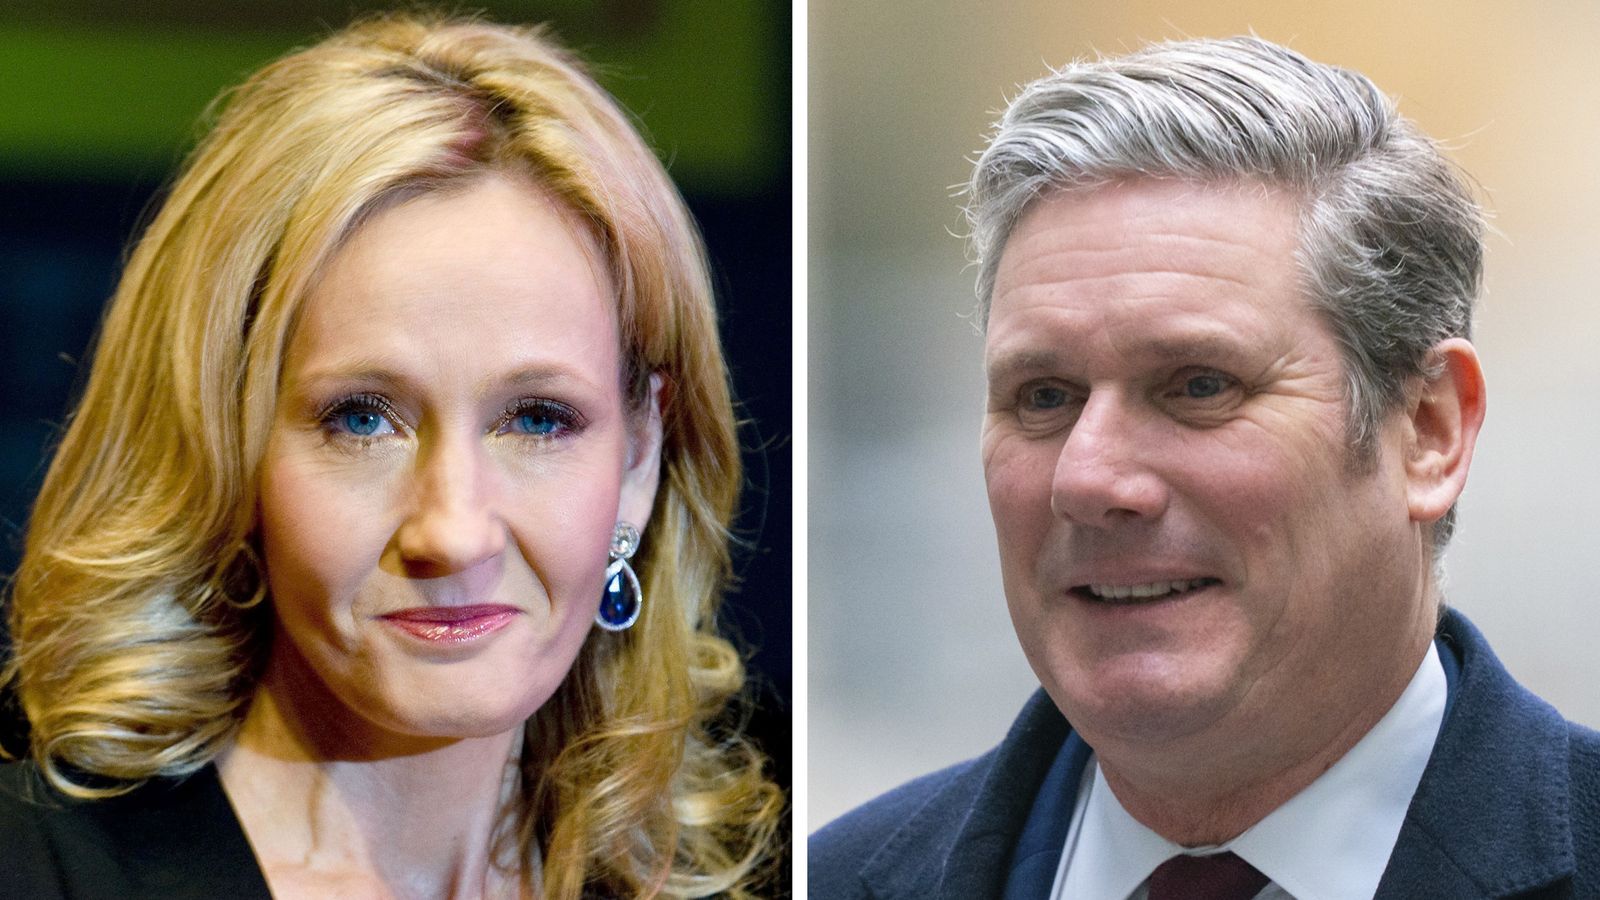 JK Rowling will 'struggle to support' Labour with Starmer's stance on gender